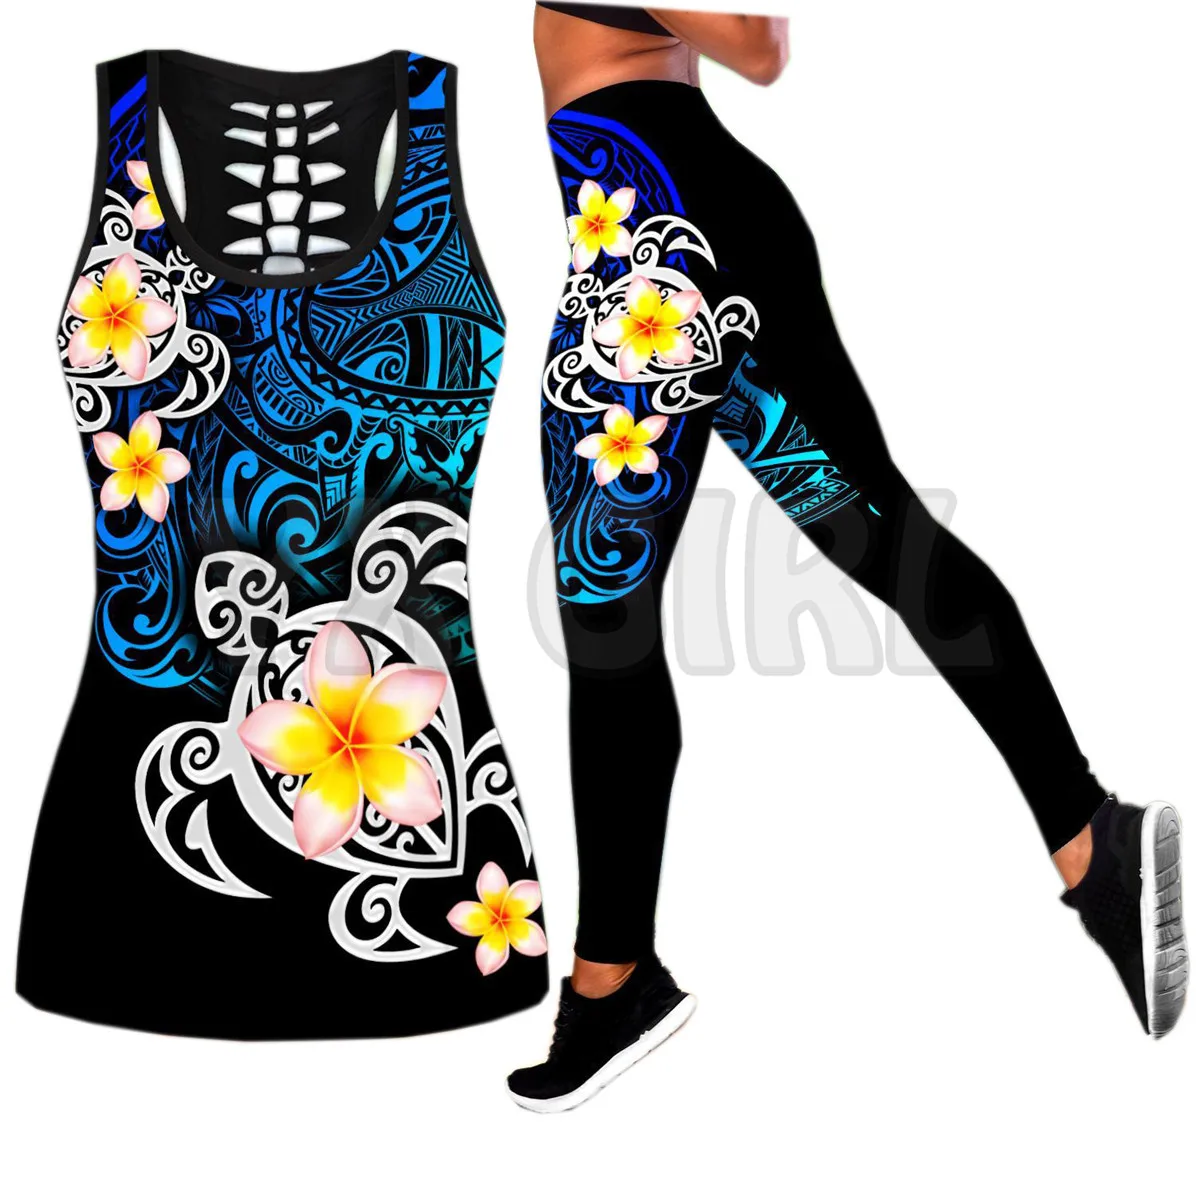 Spread Stores Turtle 3D Maori Style Tattoo Howllong Tanktop Lengging Printed Tank Top+Legging Combo Outfit Yoga Fitness Legging